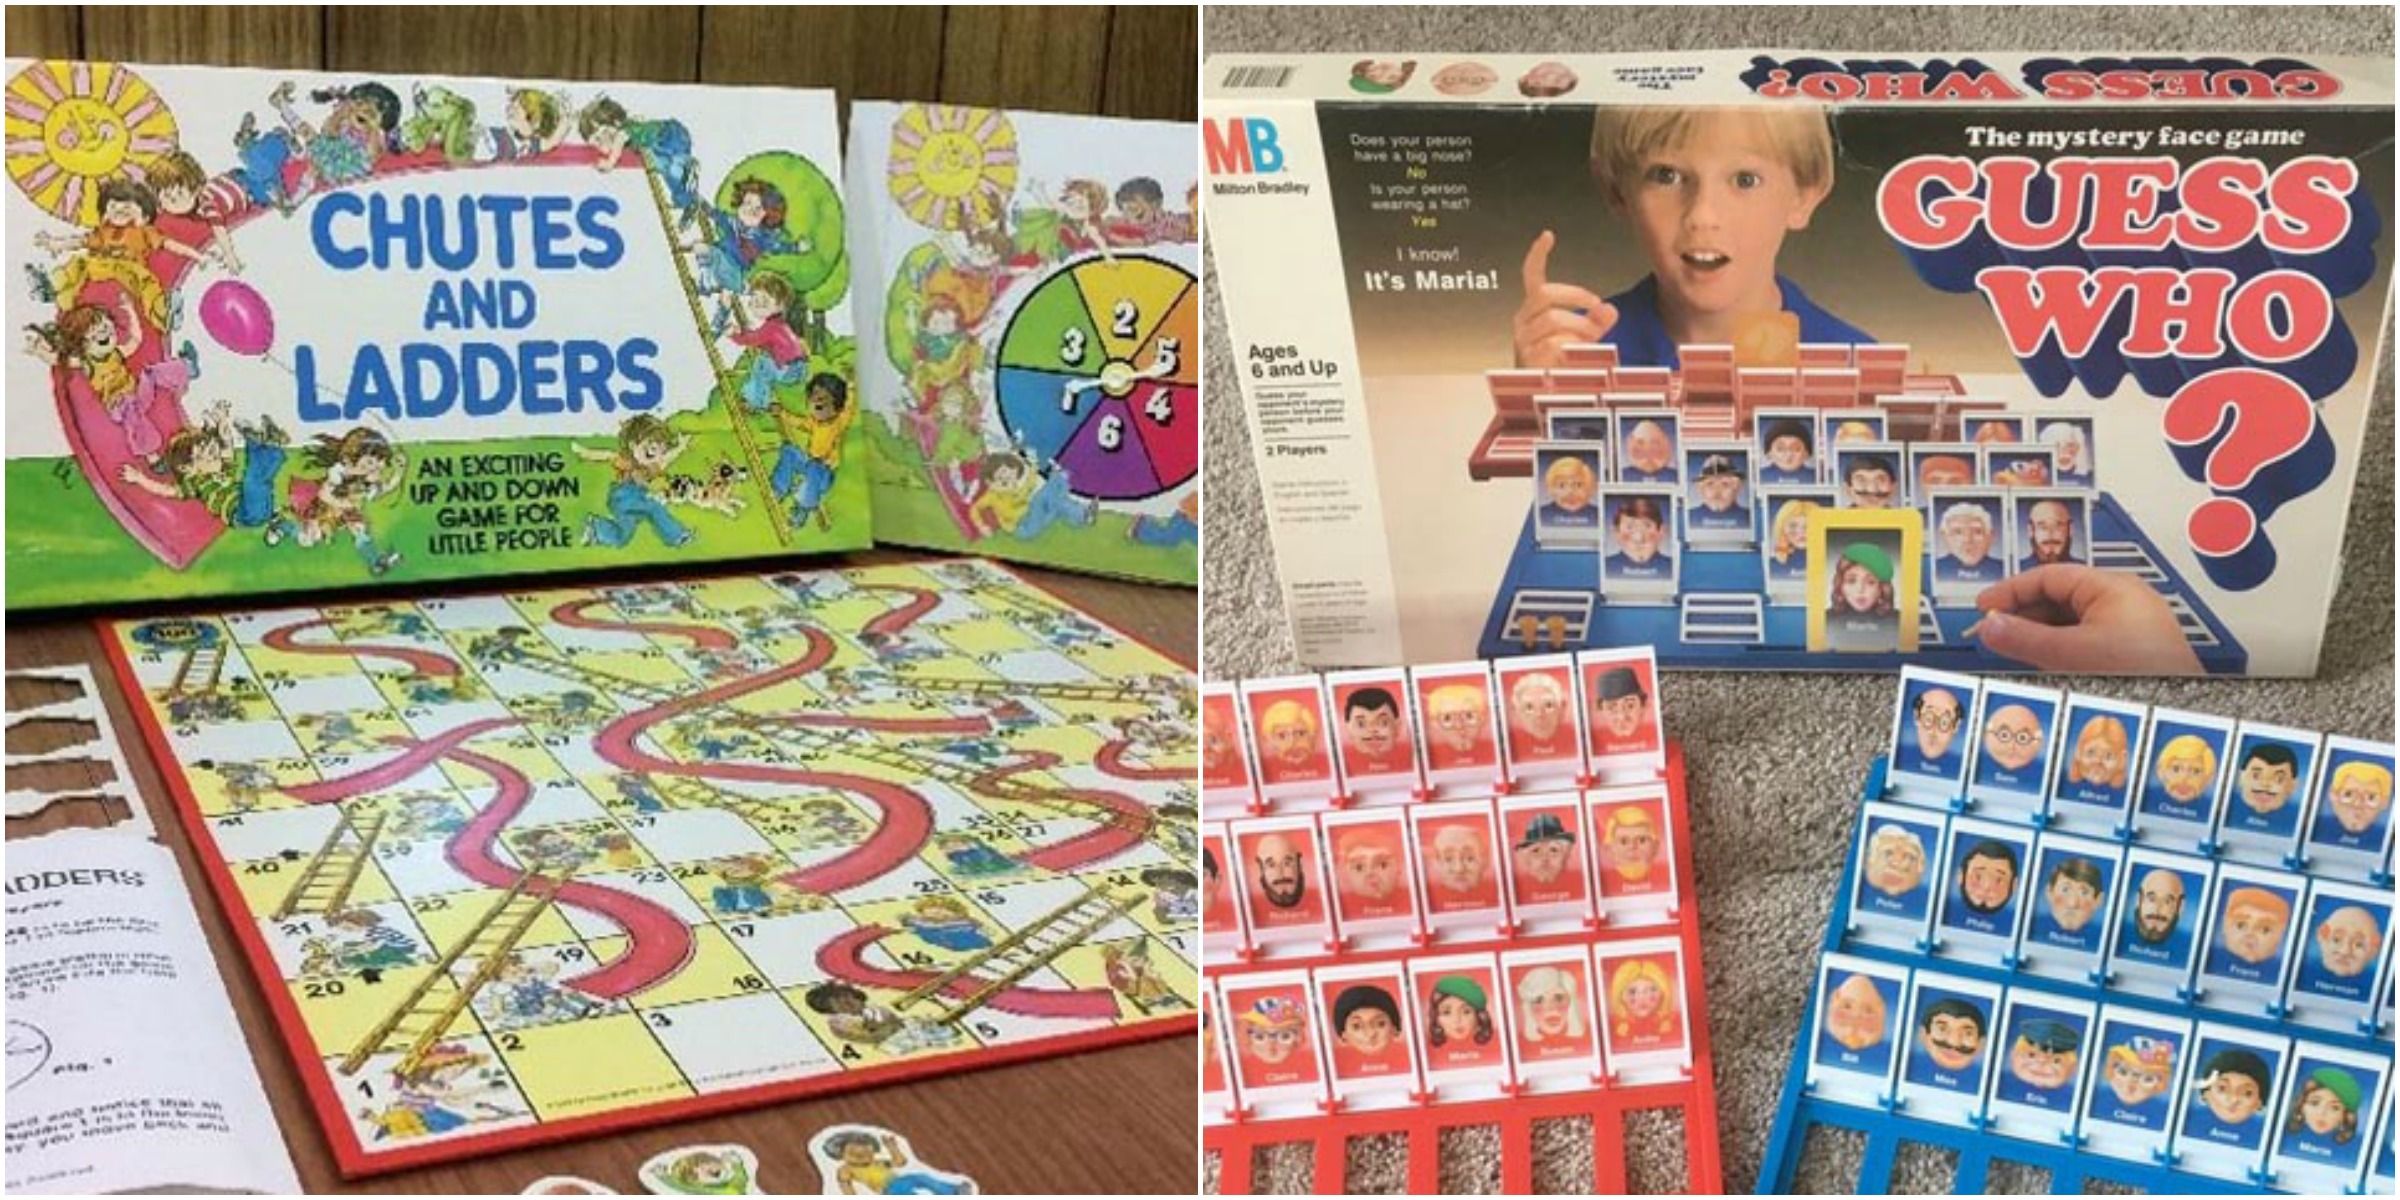 what does the candy land board game look like from the 1980s